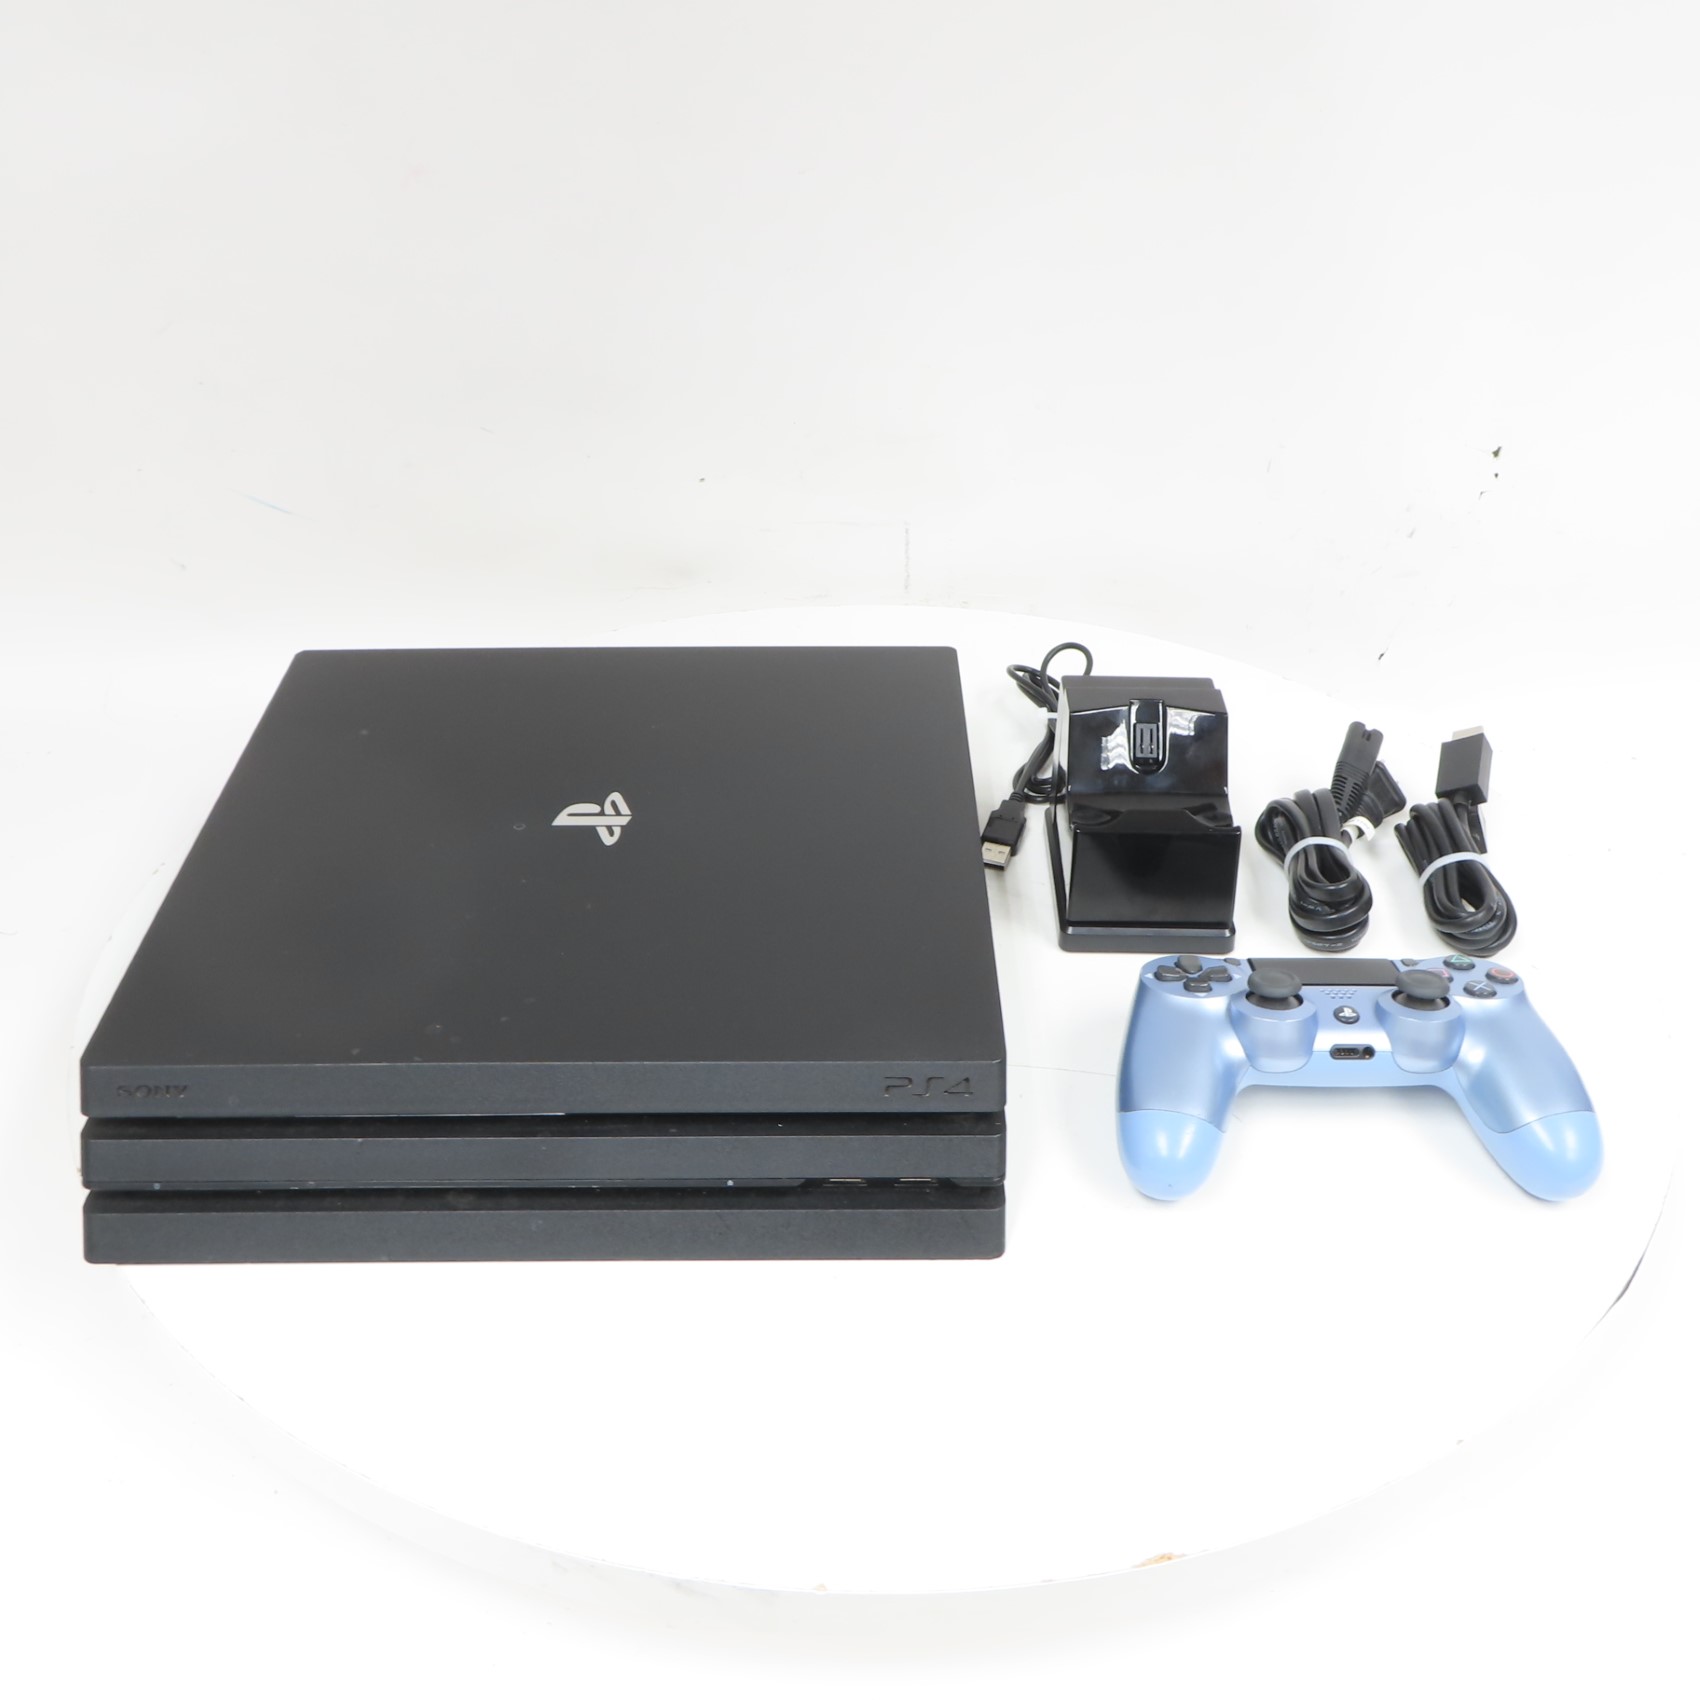 Sony PlayStation 4 Pro CUH-7215B 1TB Video Game Console - Black